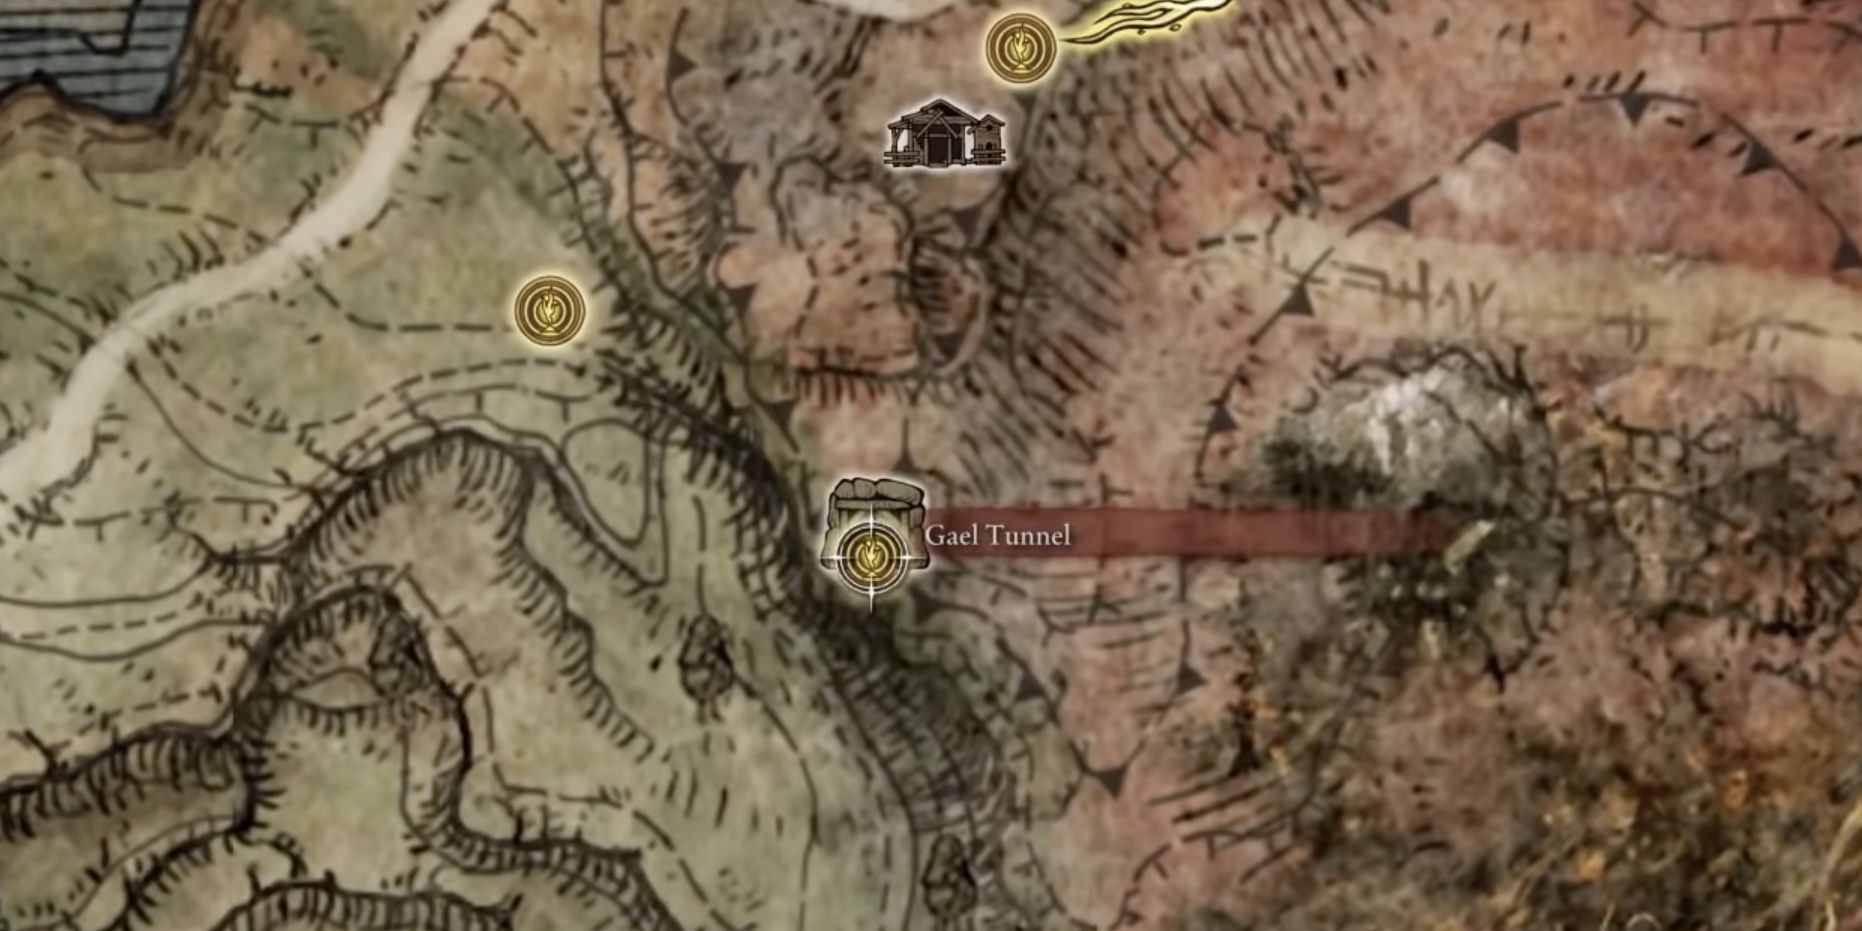 The Gael Tunnel is in the Caelid are of Elden Ring's map